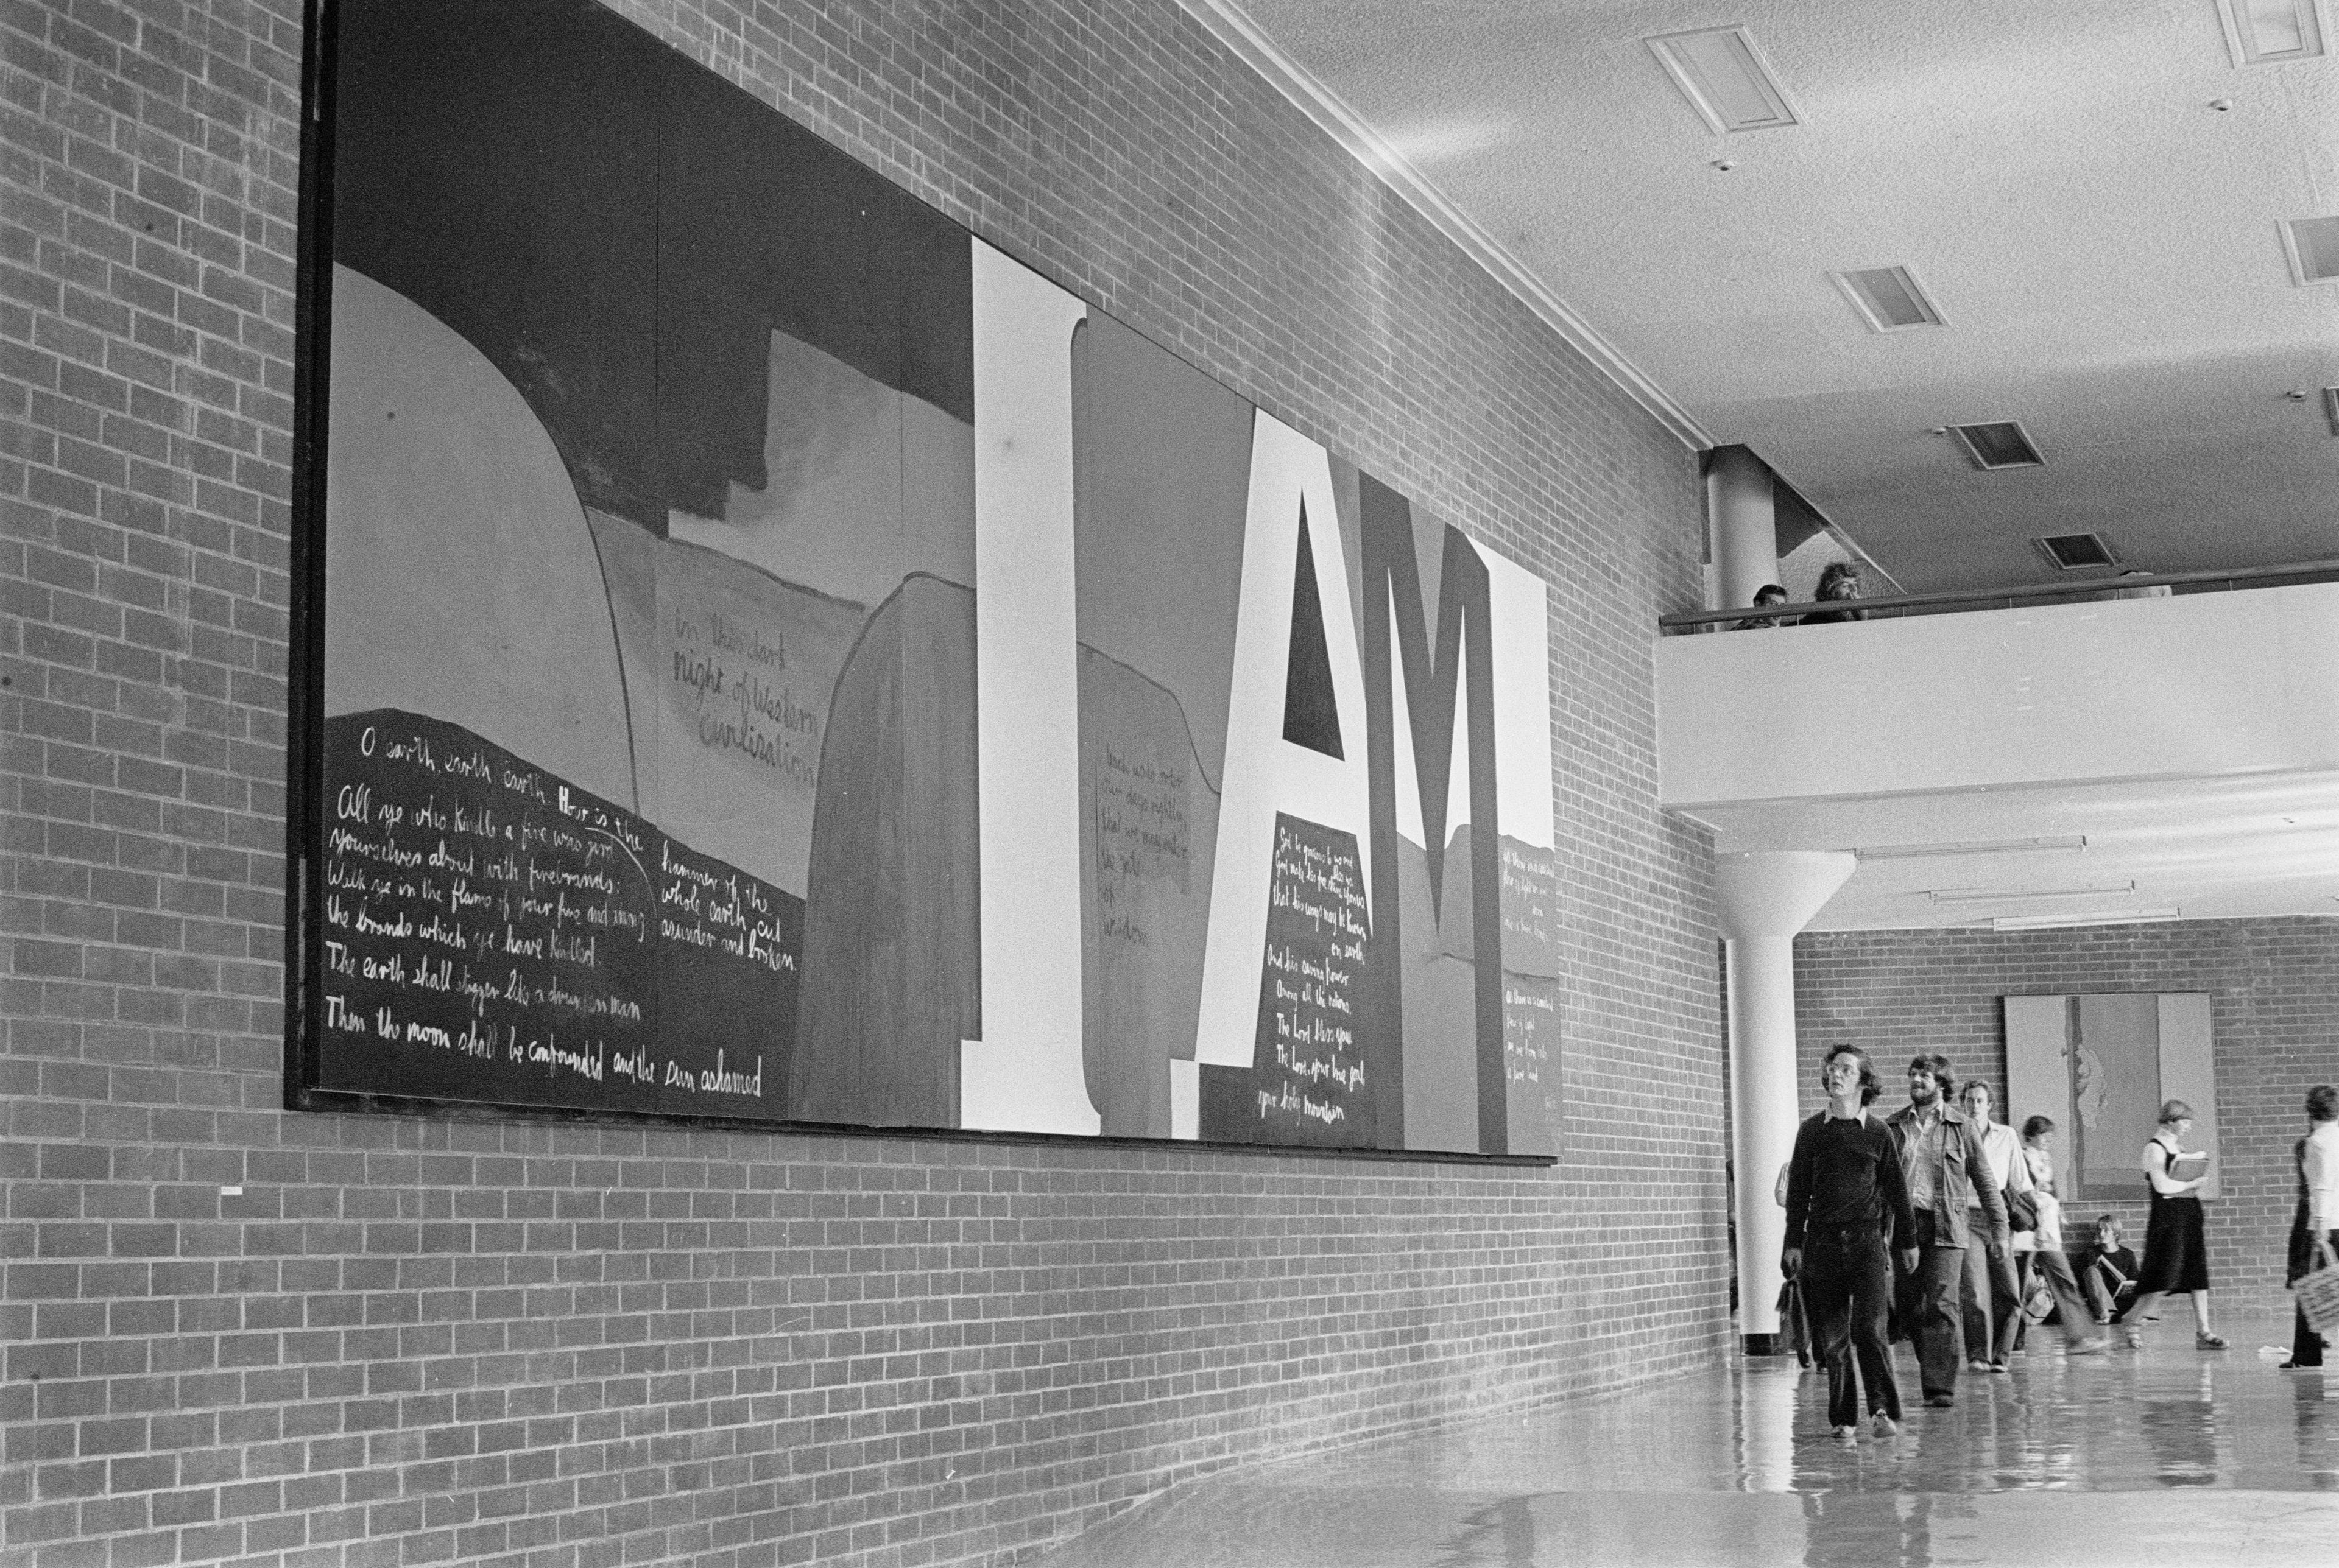 Photograph of Gate III, painting by Colin McCahon, The Dominion, [Wellington], 1978, black and white photograph, photographic negatives and prints of the Evening Post and Dominion newspapers, Ref: EP/1978/1078/5A-F. Alexander Turnbull Library, Wellington